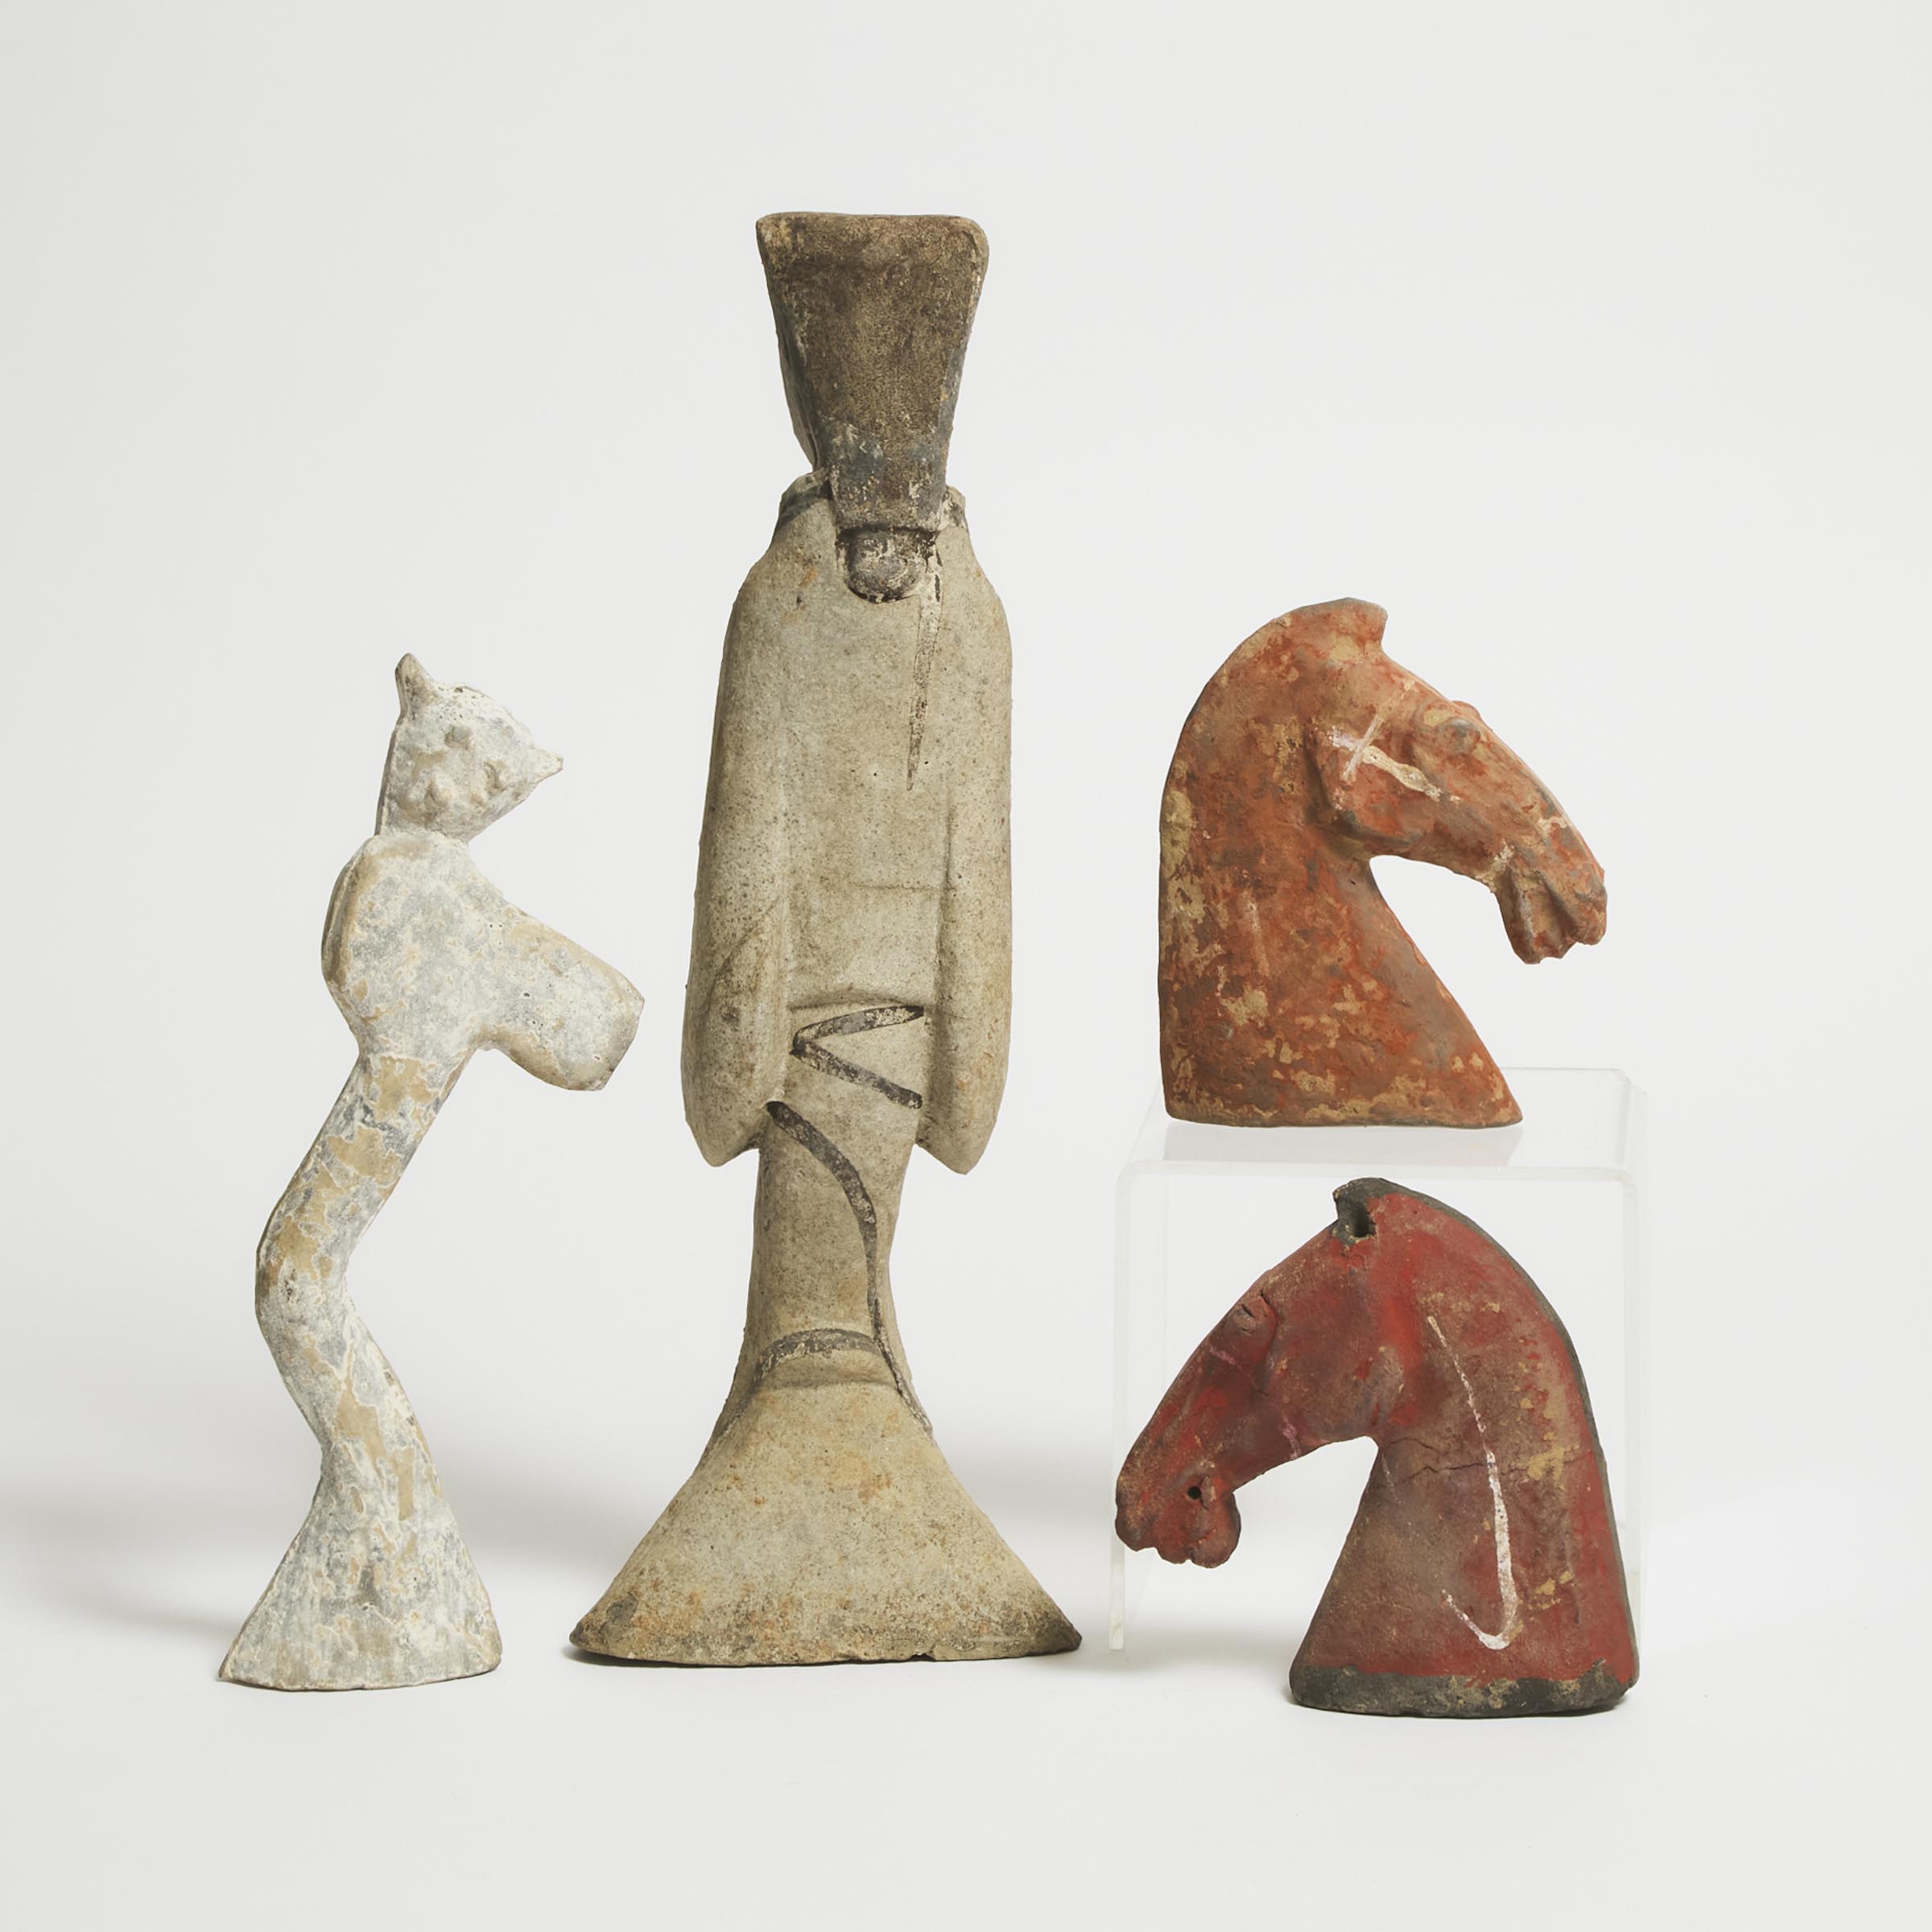 A Group of Four Pottery Figures and Horse Heads, Han Dynasty (206 BC-AD 220)